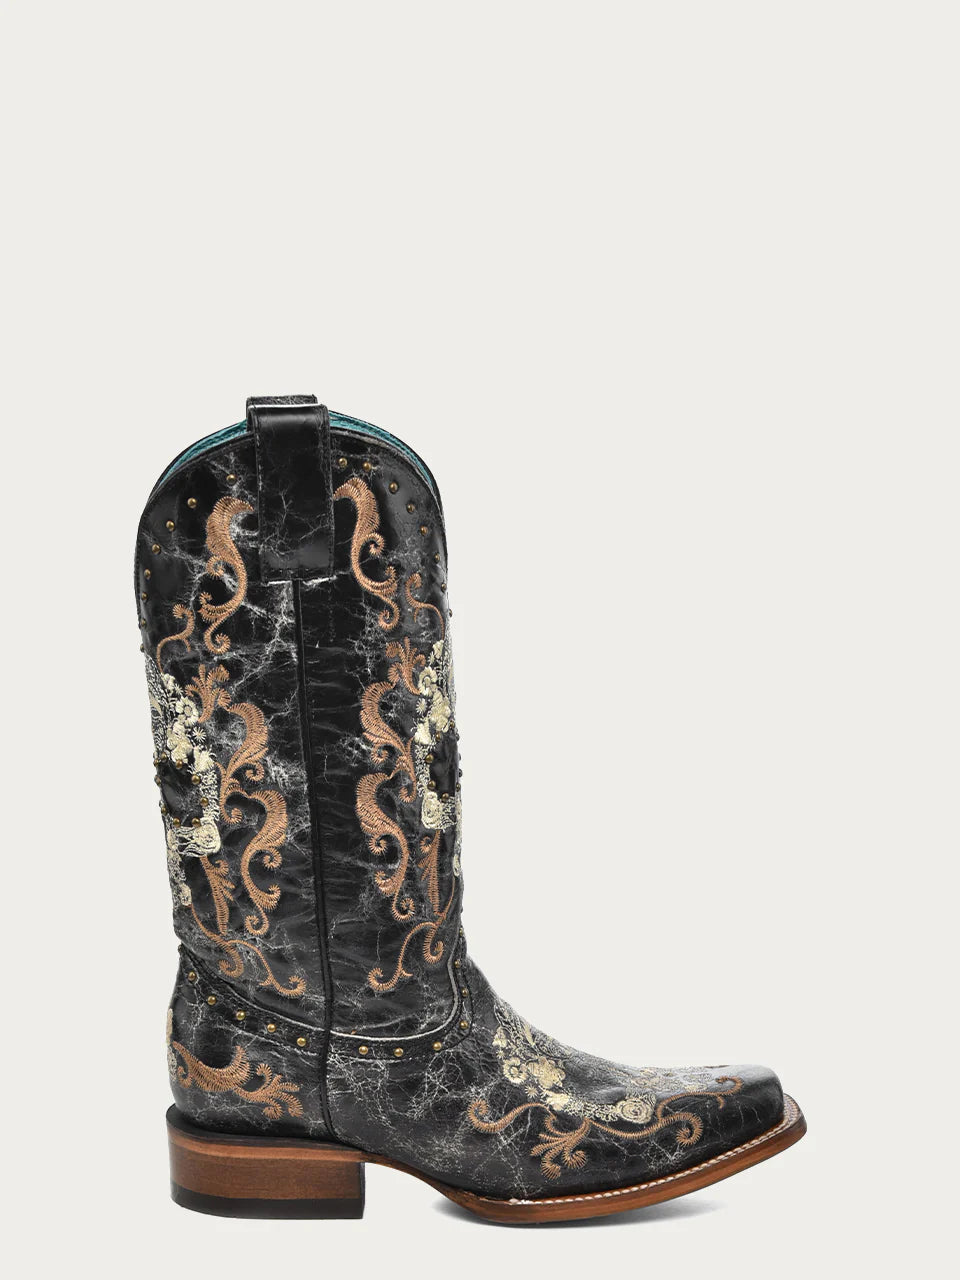 Black Sugar Skull Embroidery & Studs Western Boot - Corral Boots